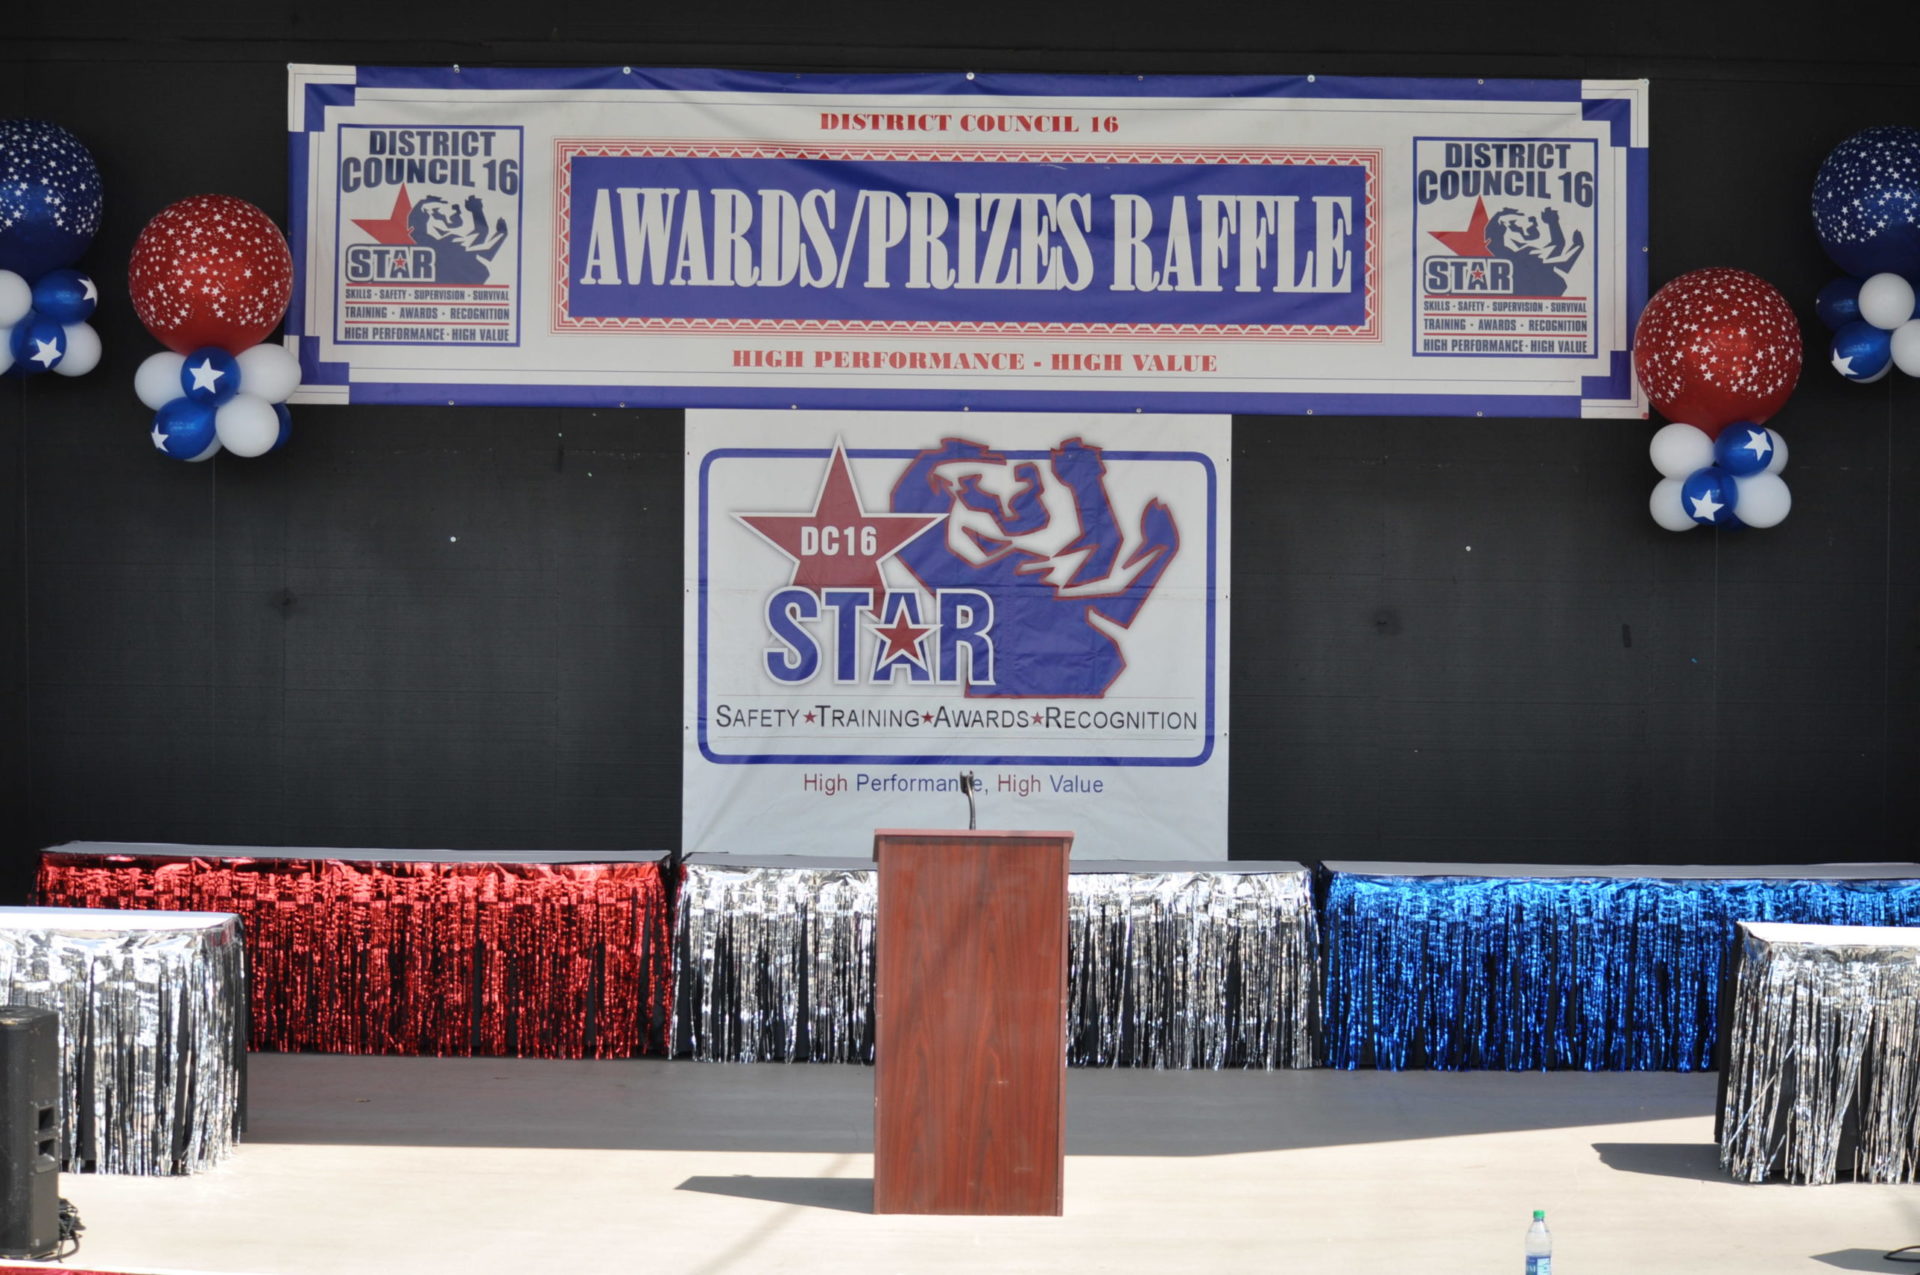 Image from the Gallery: STAR Awards Event – Pleasanton, CA